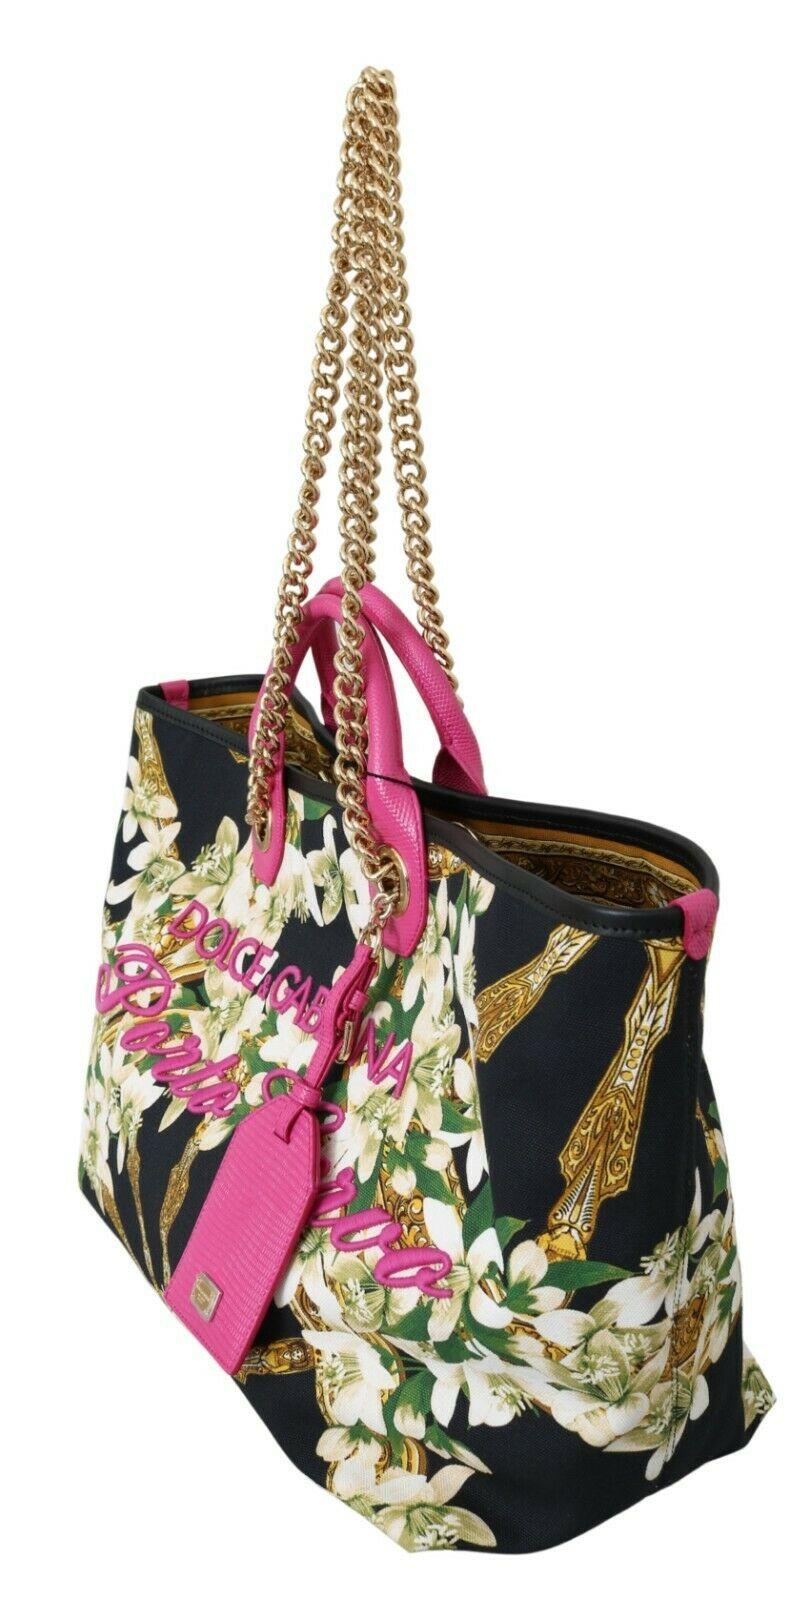  Gorgeous brand new with tags, 100% Authentic Dolce & Gabbana Women's Bag.




Model: CAPRI tote bag

Color: Black Floral Porto Cervo

Material: 80% Cotton 10% Leather 7% Polyester 2% Silk 1% Nylon

Magnetic flap closure

Logo details

Made in